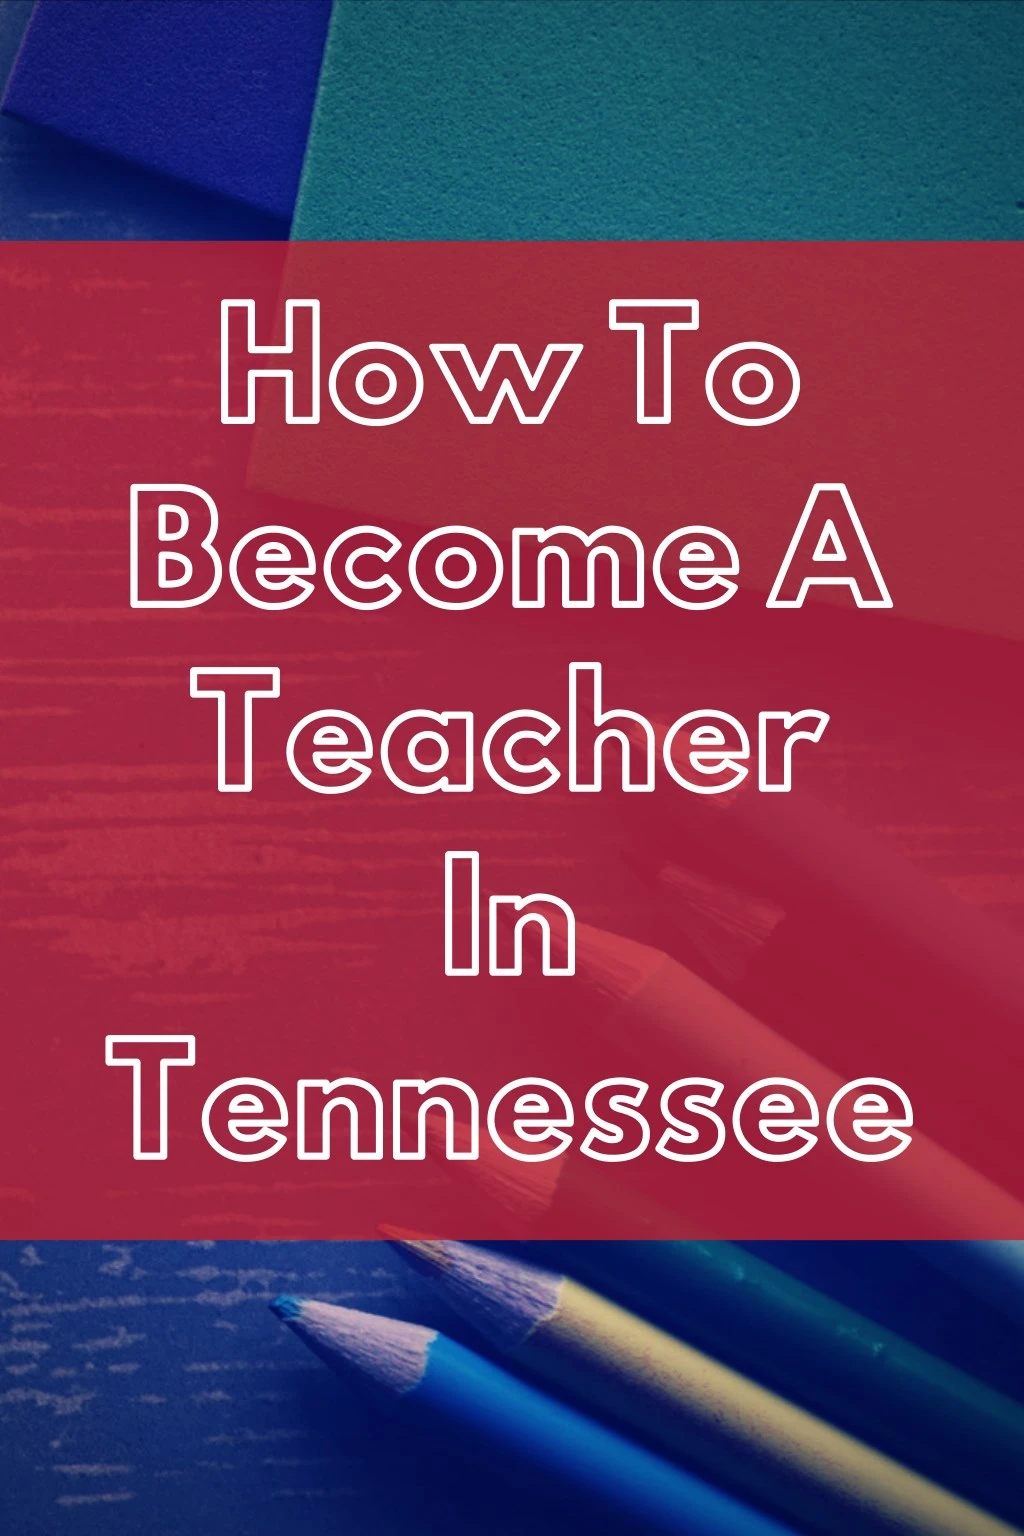 how to become a teacher in tennessee